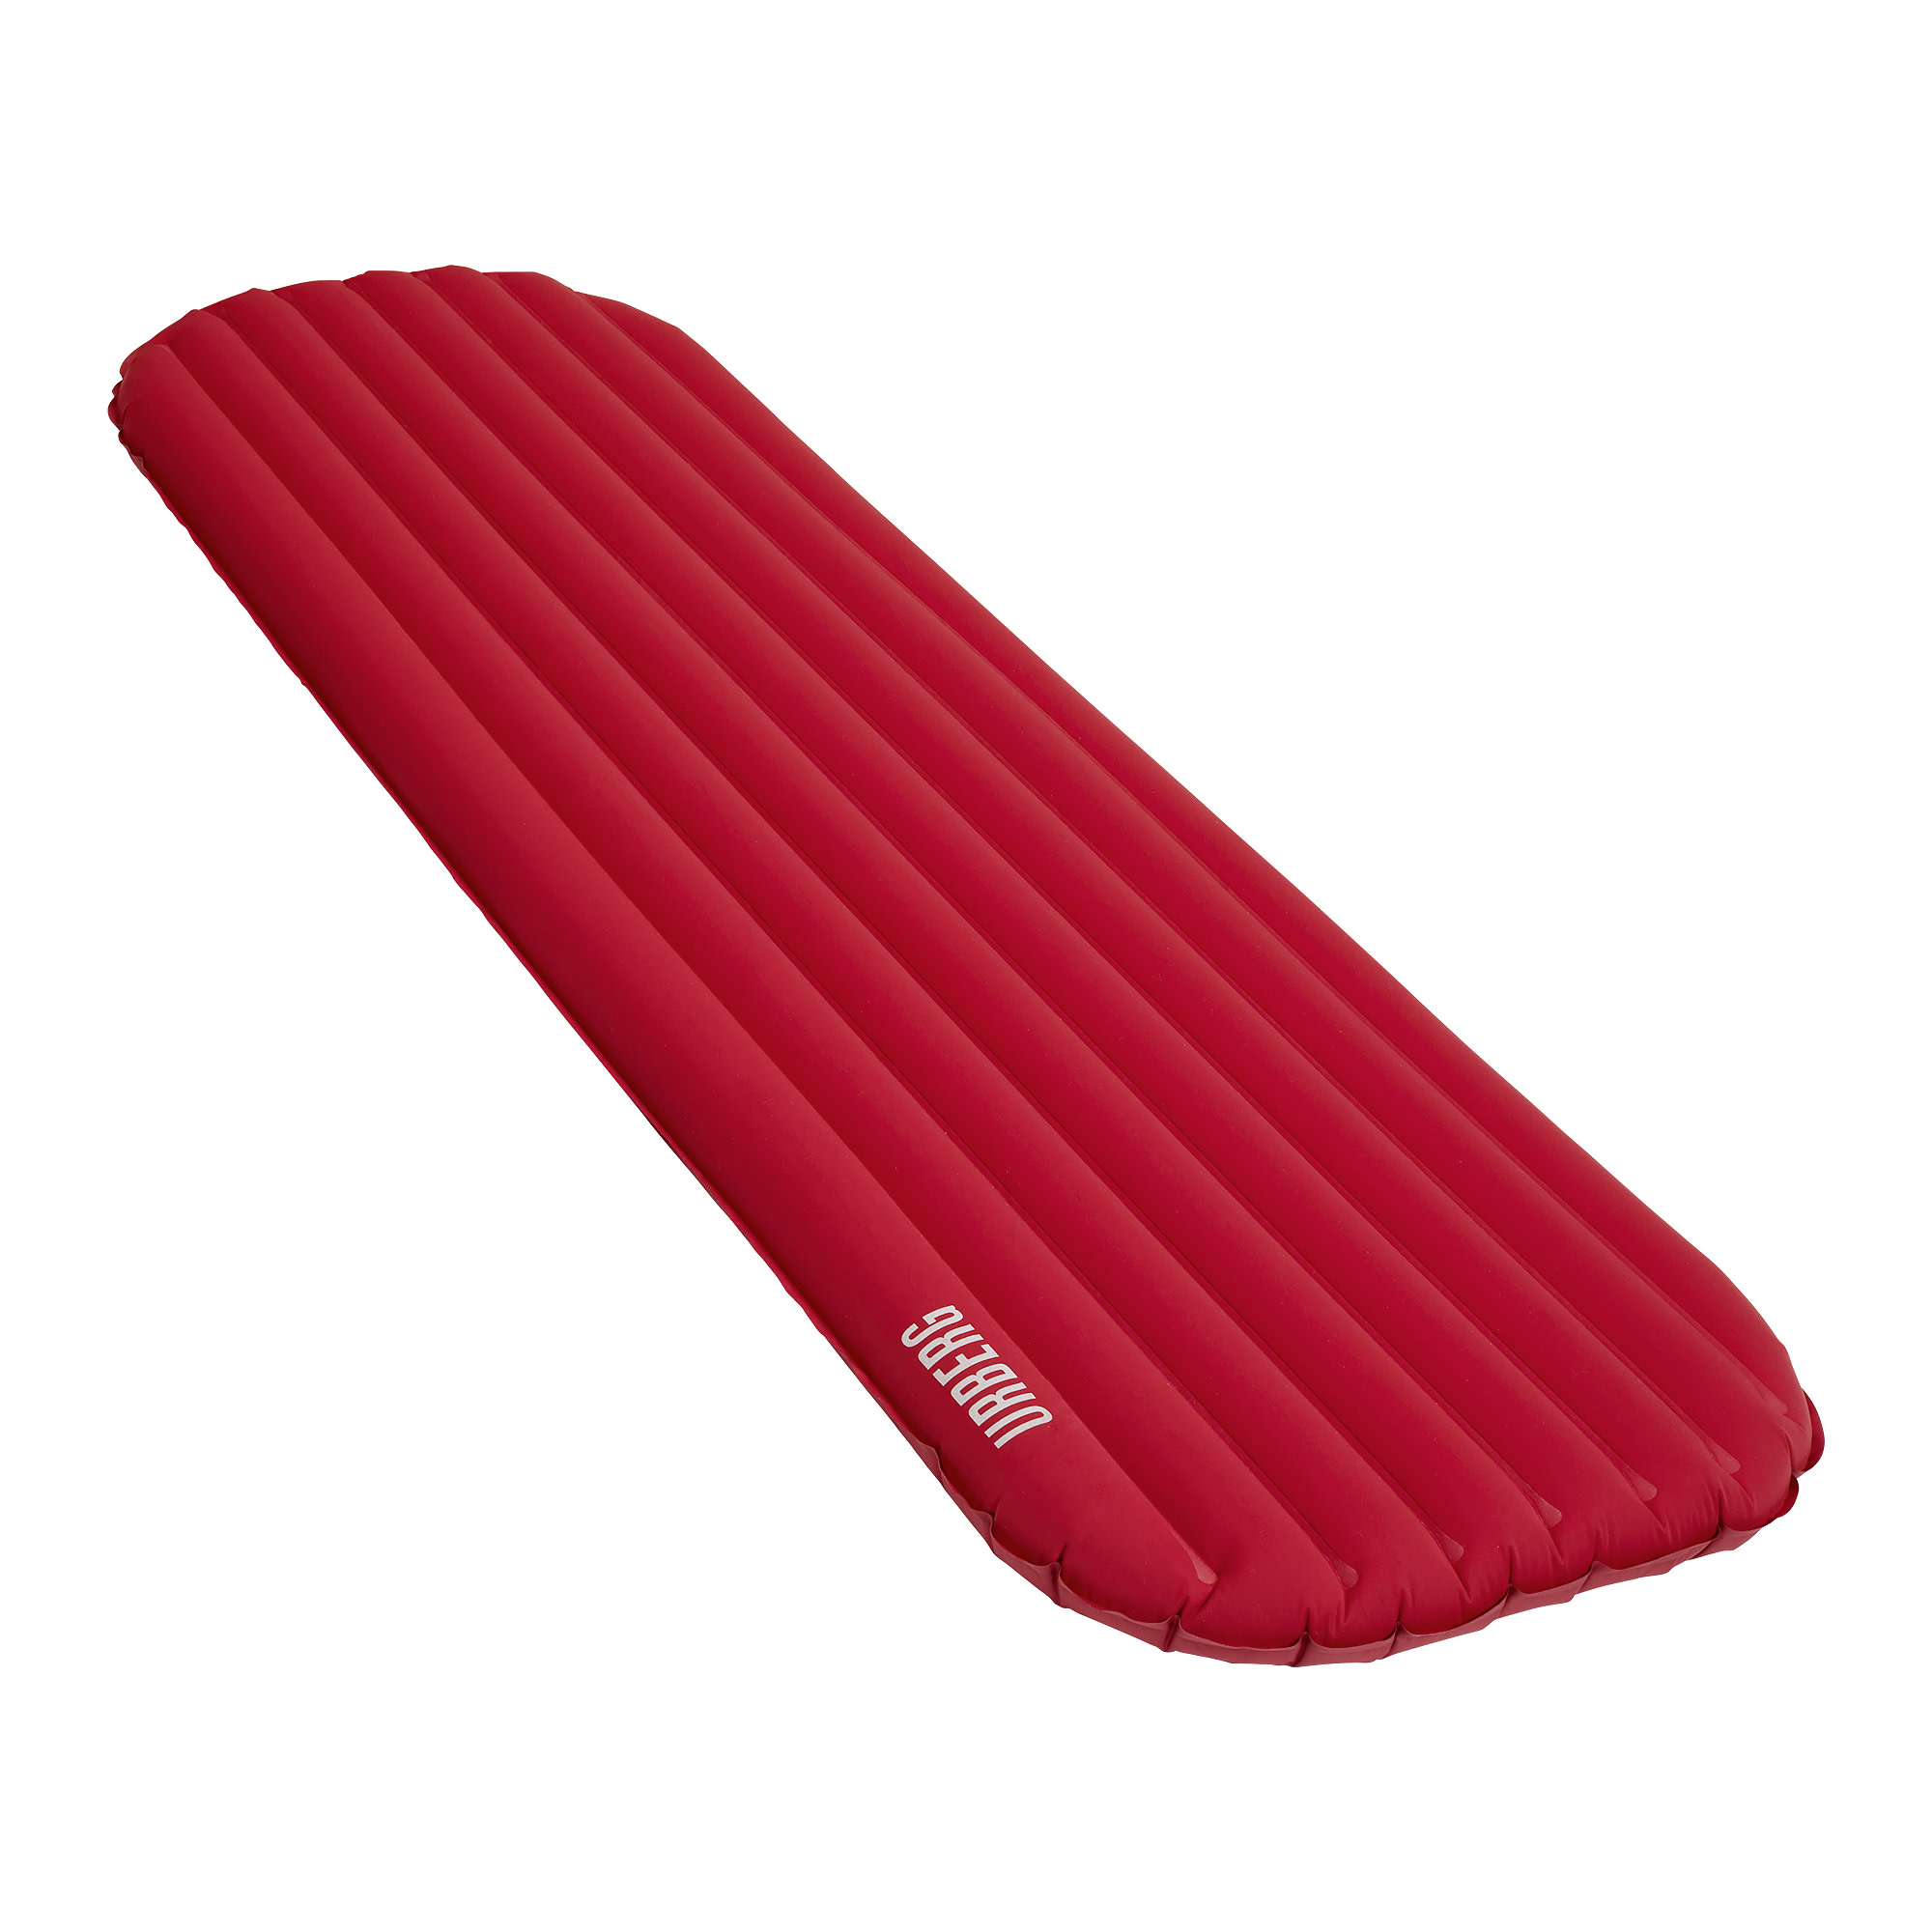 Insulated Airmat Vertical Channels Rio Red